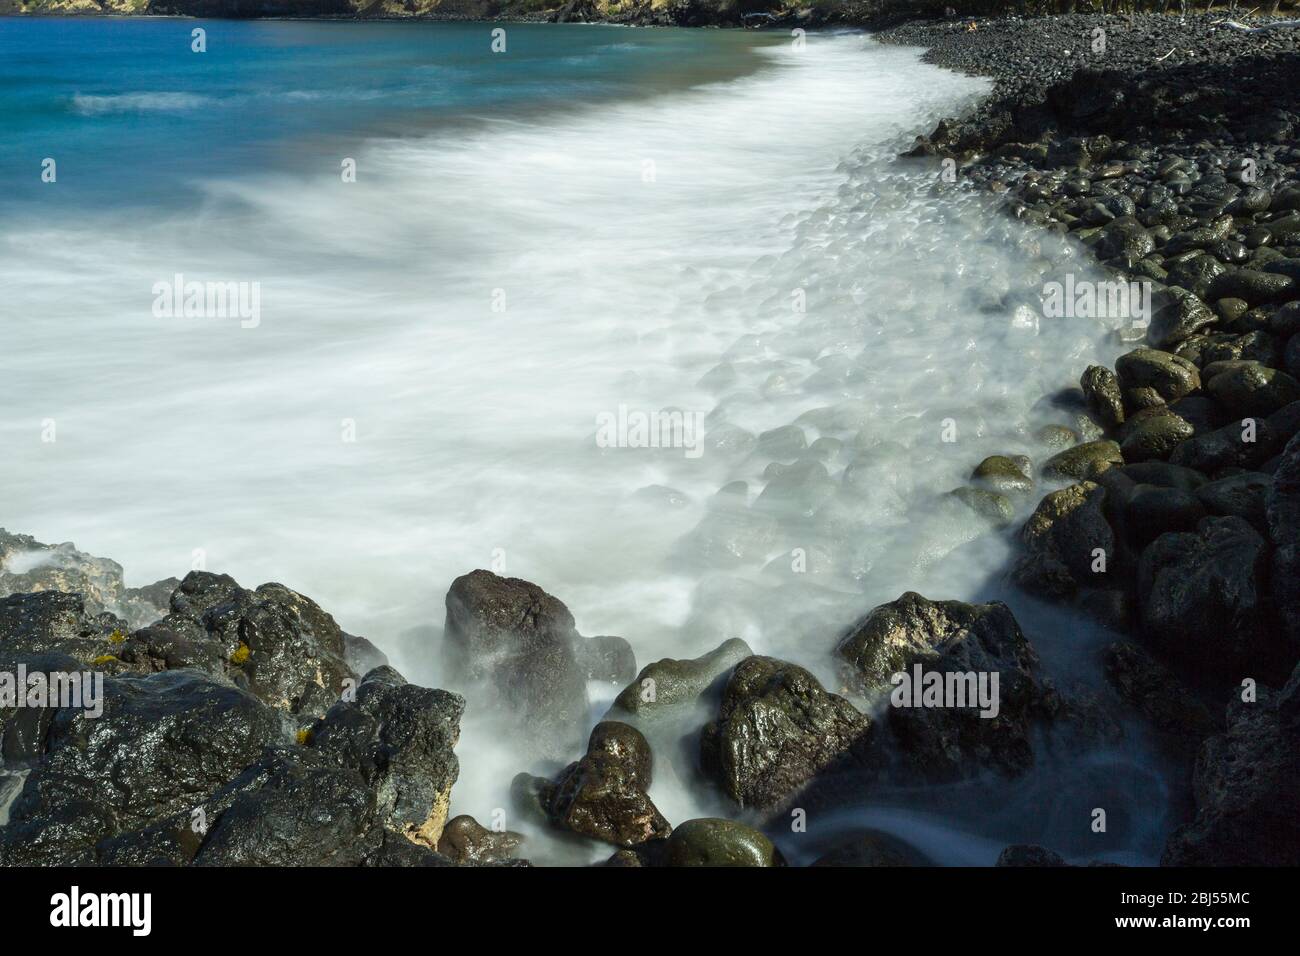 Time exposure of surf on rocky beach at Napoopoo, Hawaii Stock Photo